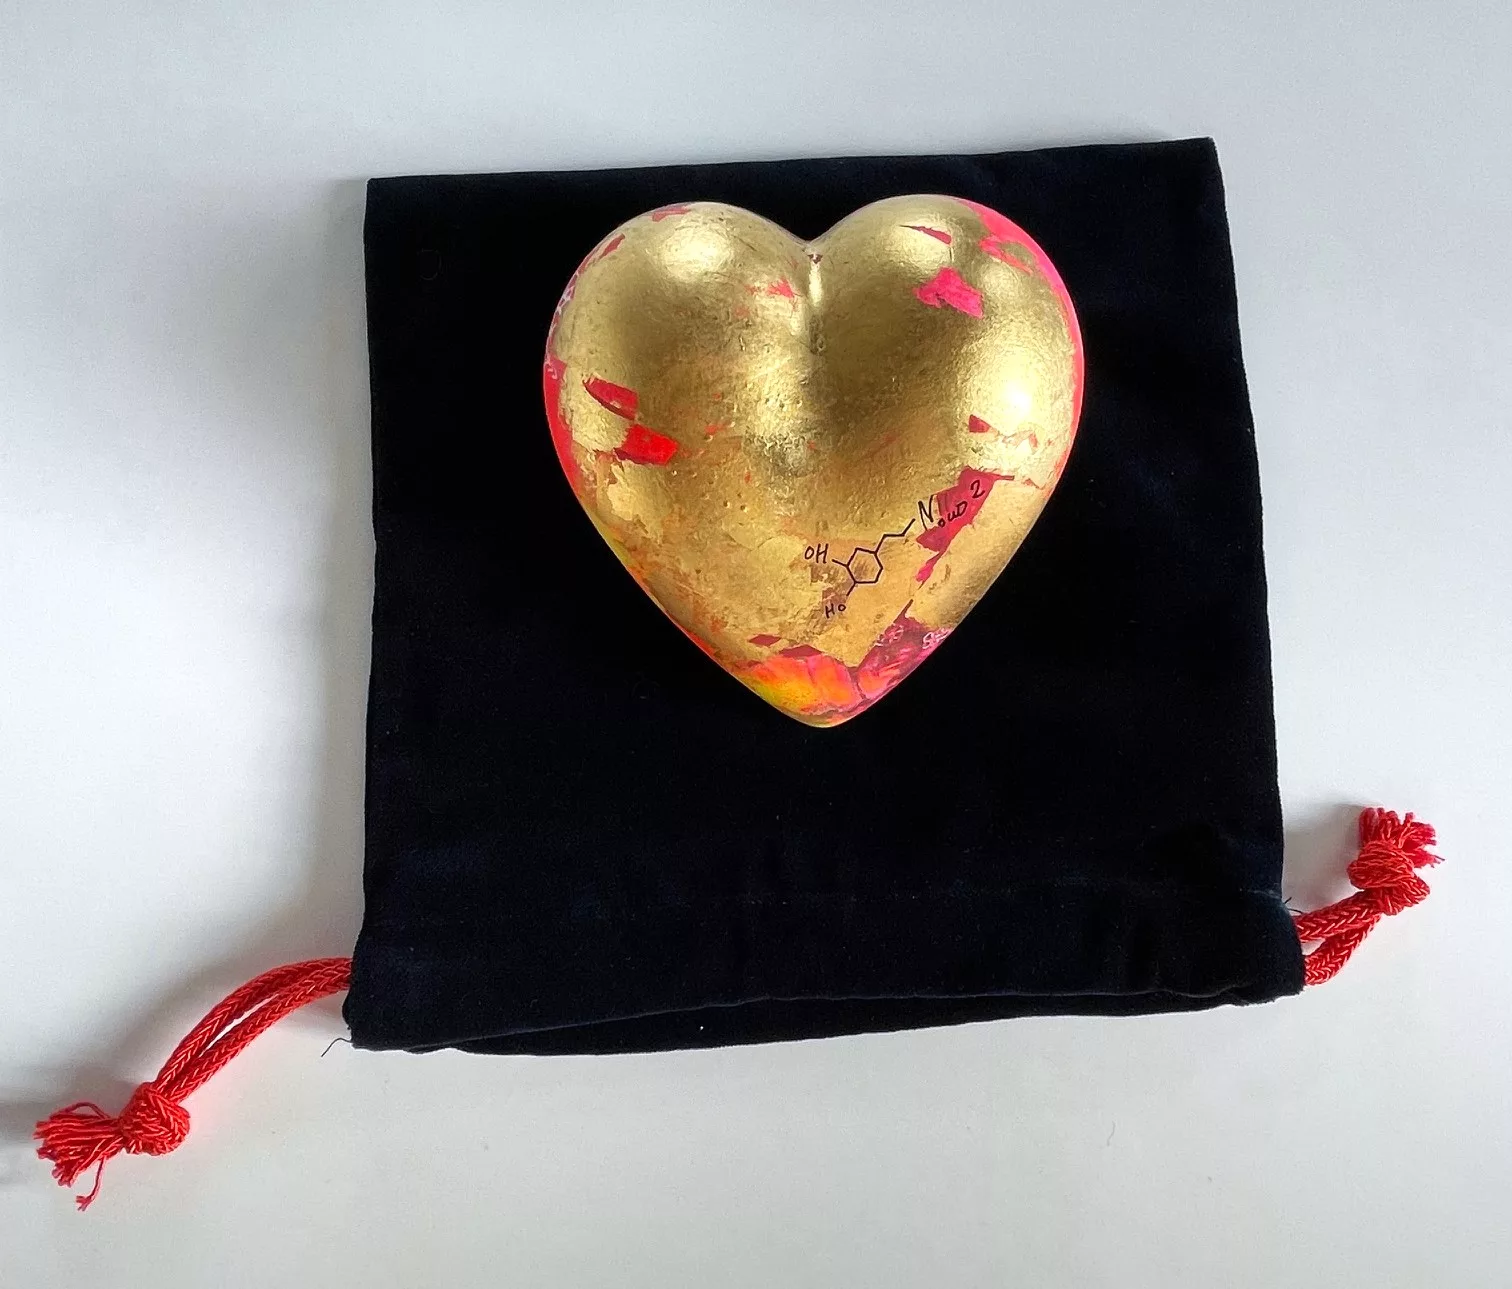 Spray your love I, Resin technique, paint and 24-carat gold leaf (3)